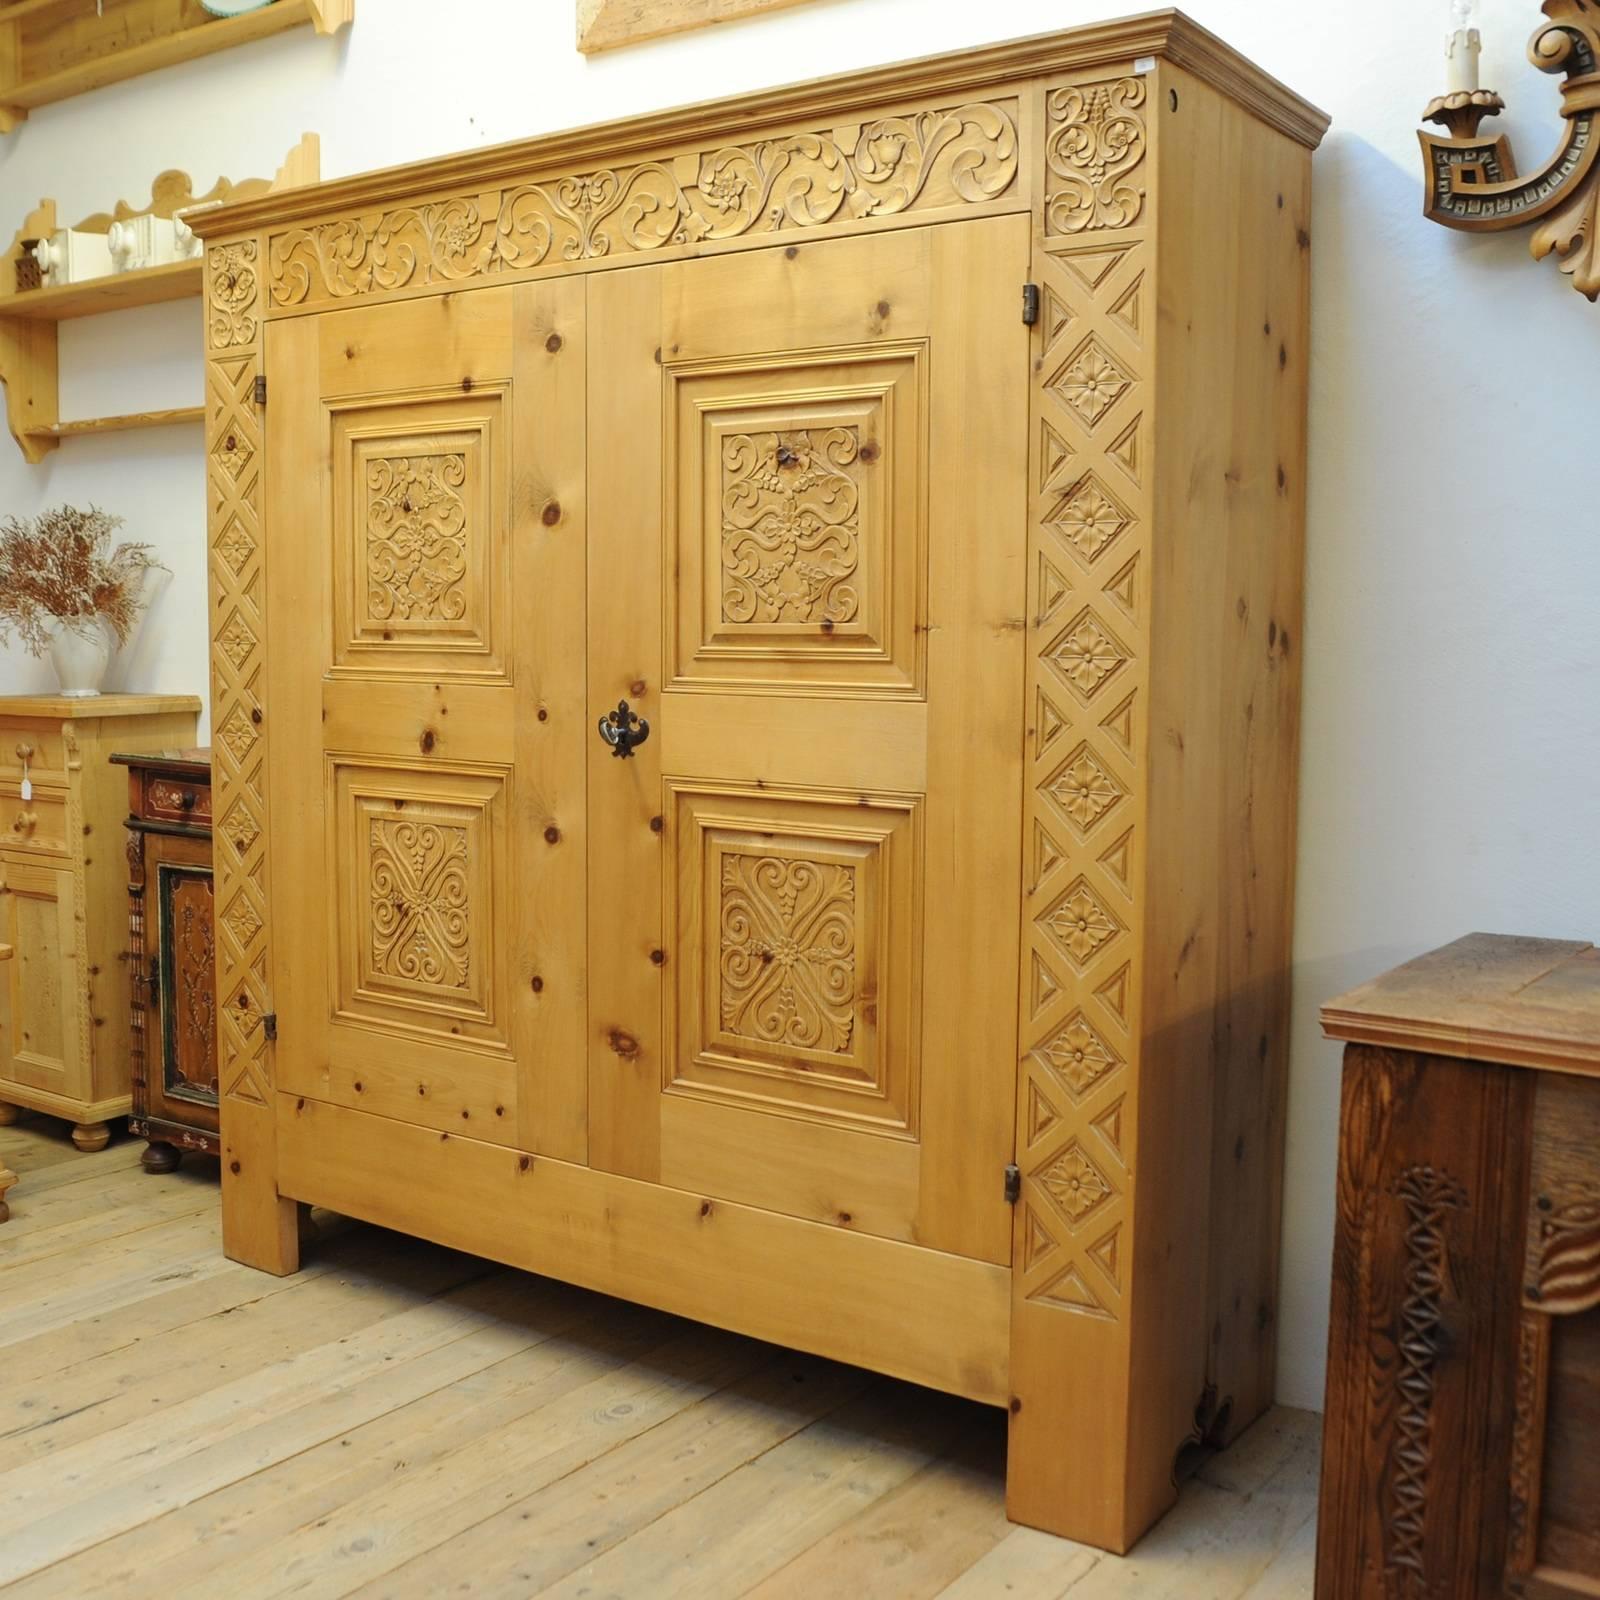 This elegant cabinet was crafted of Swiss pine wood in a Minimalist shape that was planed by hand in a stunning pattern that combines geometric and symmetrical decorations with sinuous and floral motifs. The two doors boast hinges and handles hand